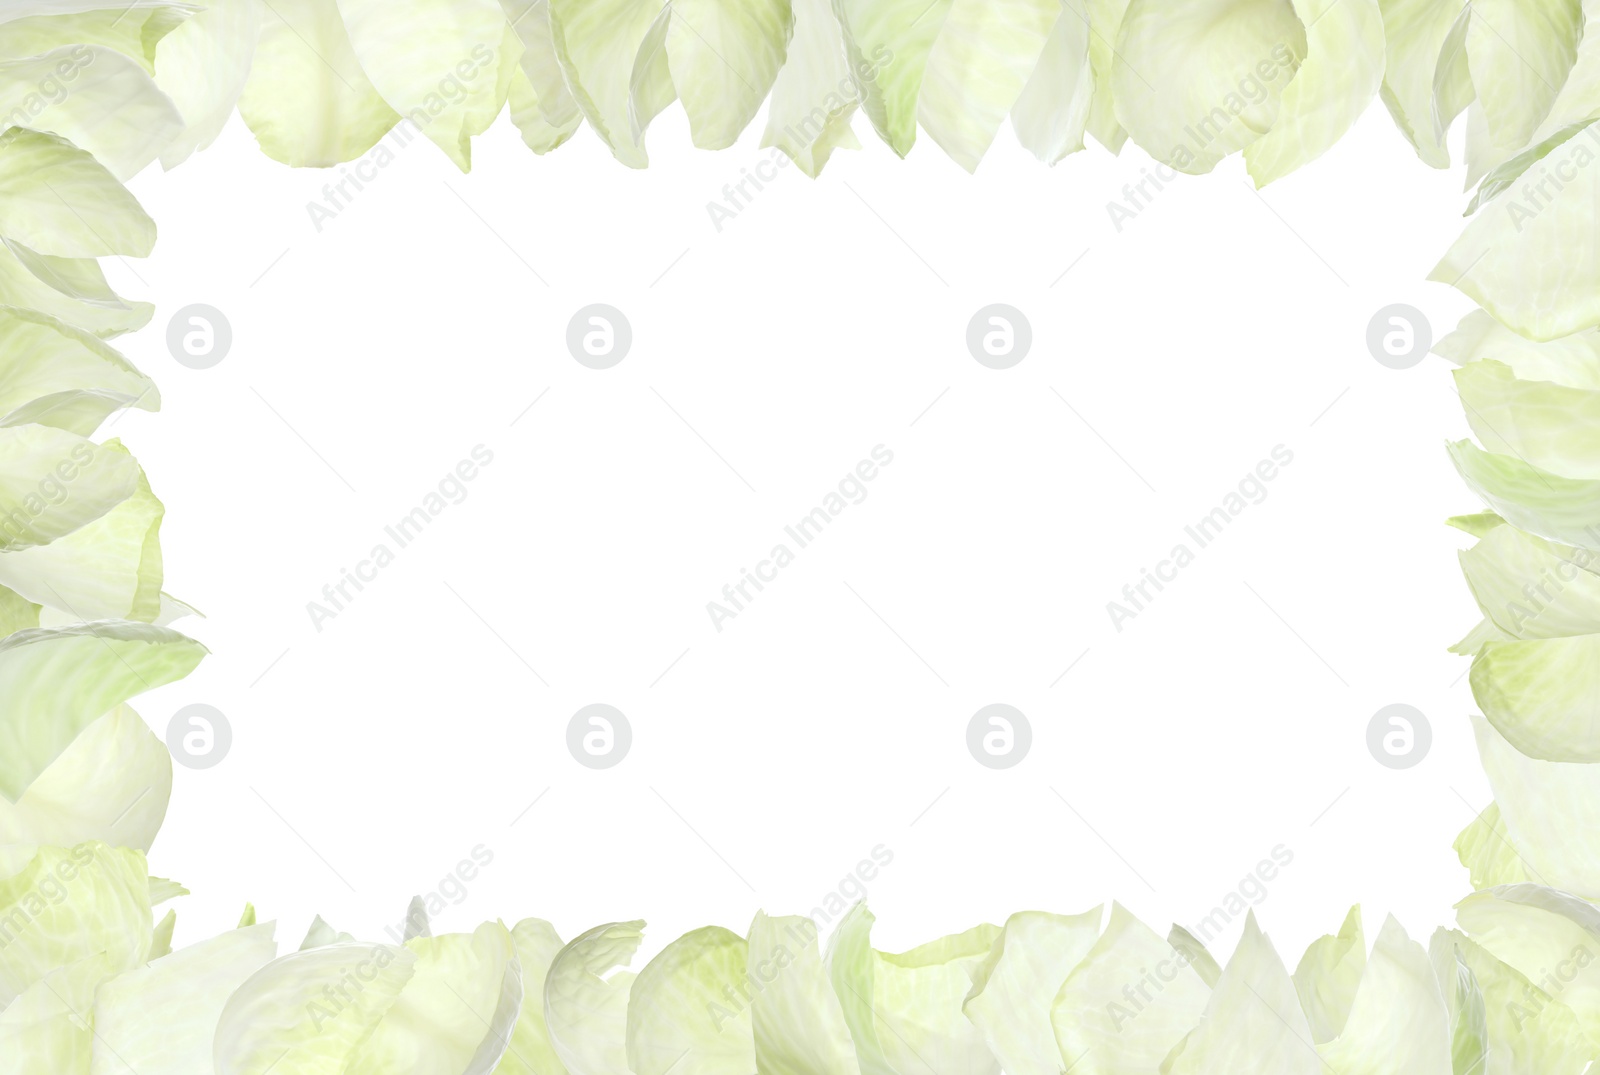 Image of Frame made with fresh leaves of cabbage on white background. Space for design